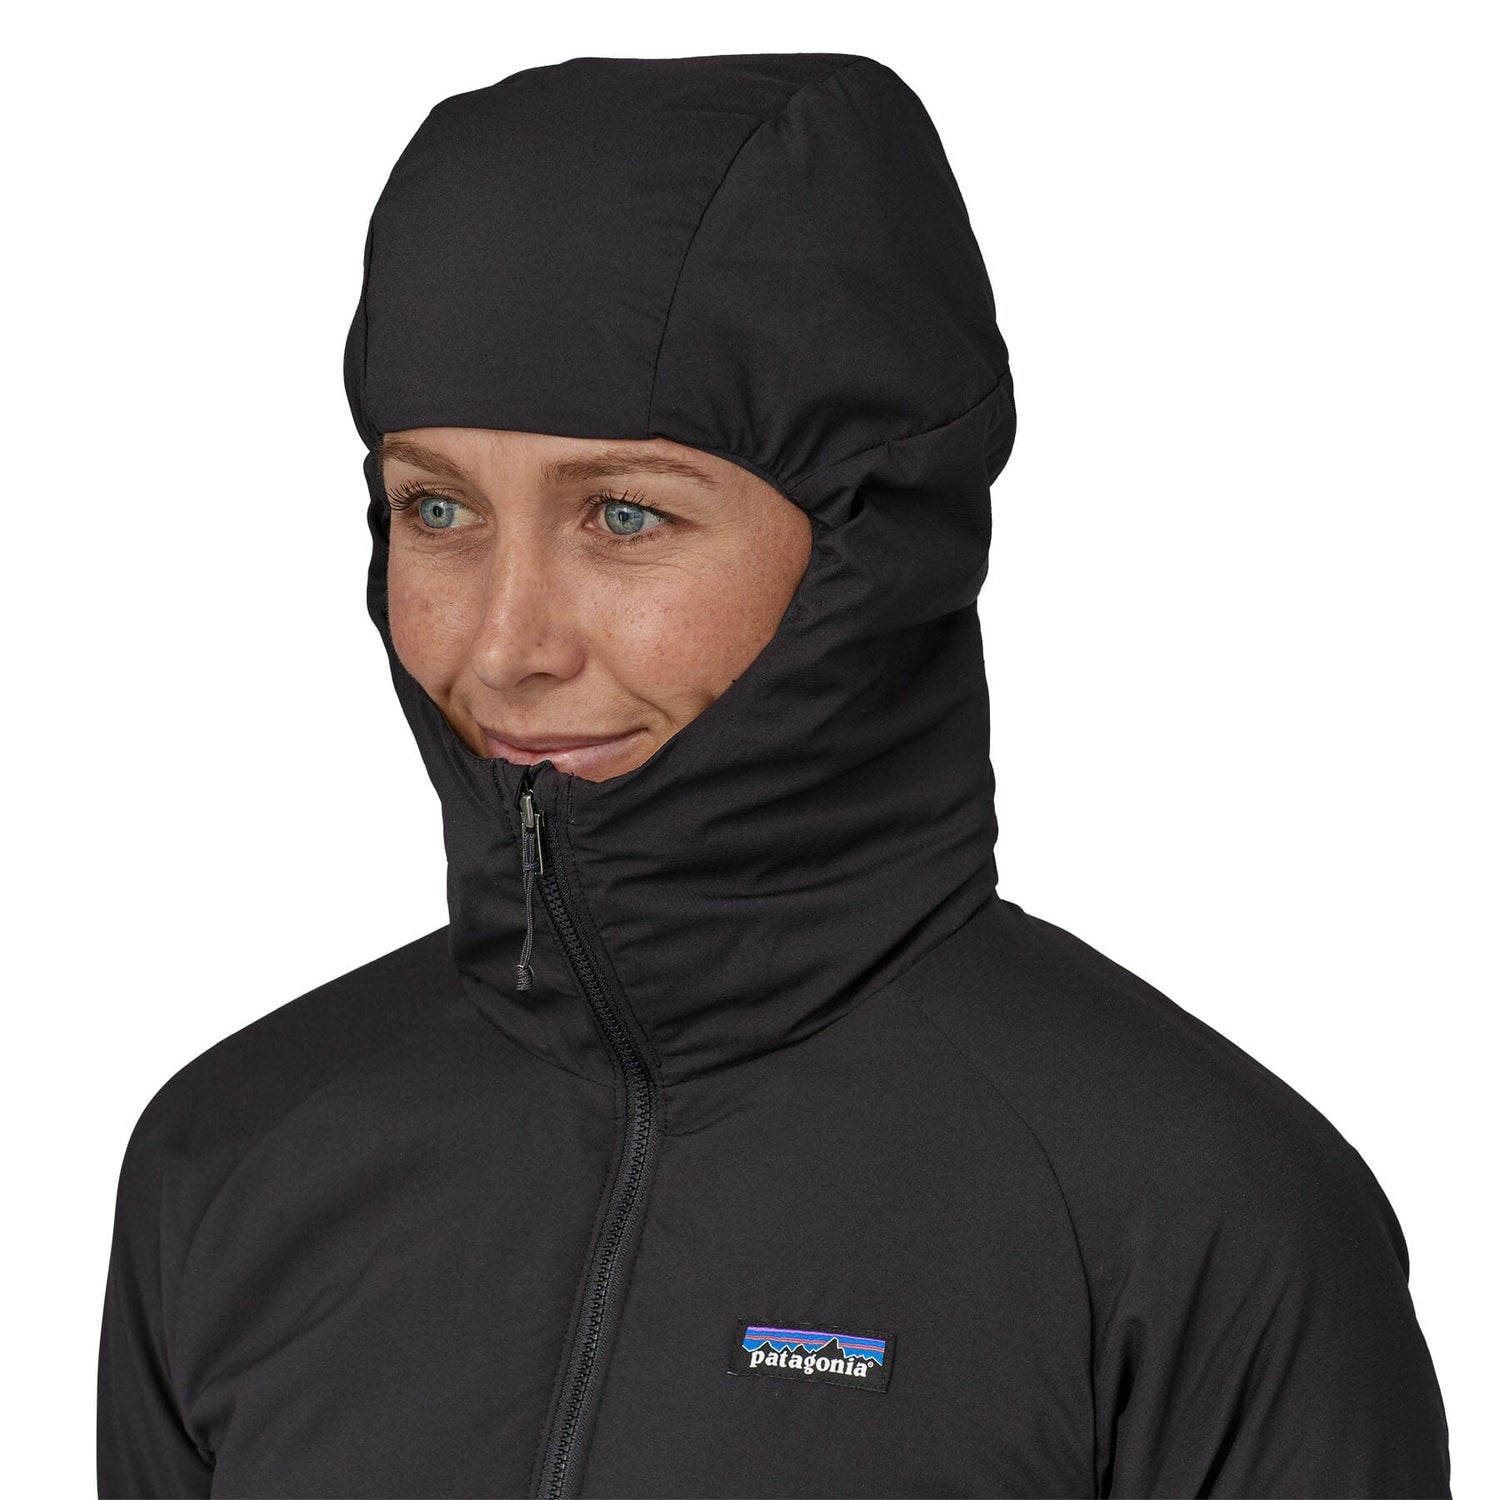 Patagonia - W's Nano-Air Light Hybrid Hoody - Recycled Polyester - Weekendbee - sustainable sportswear